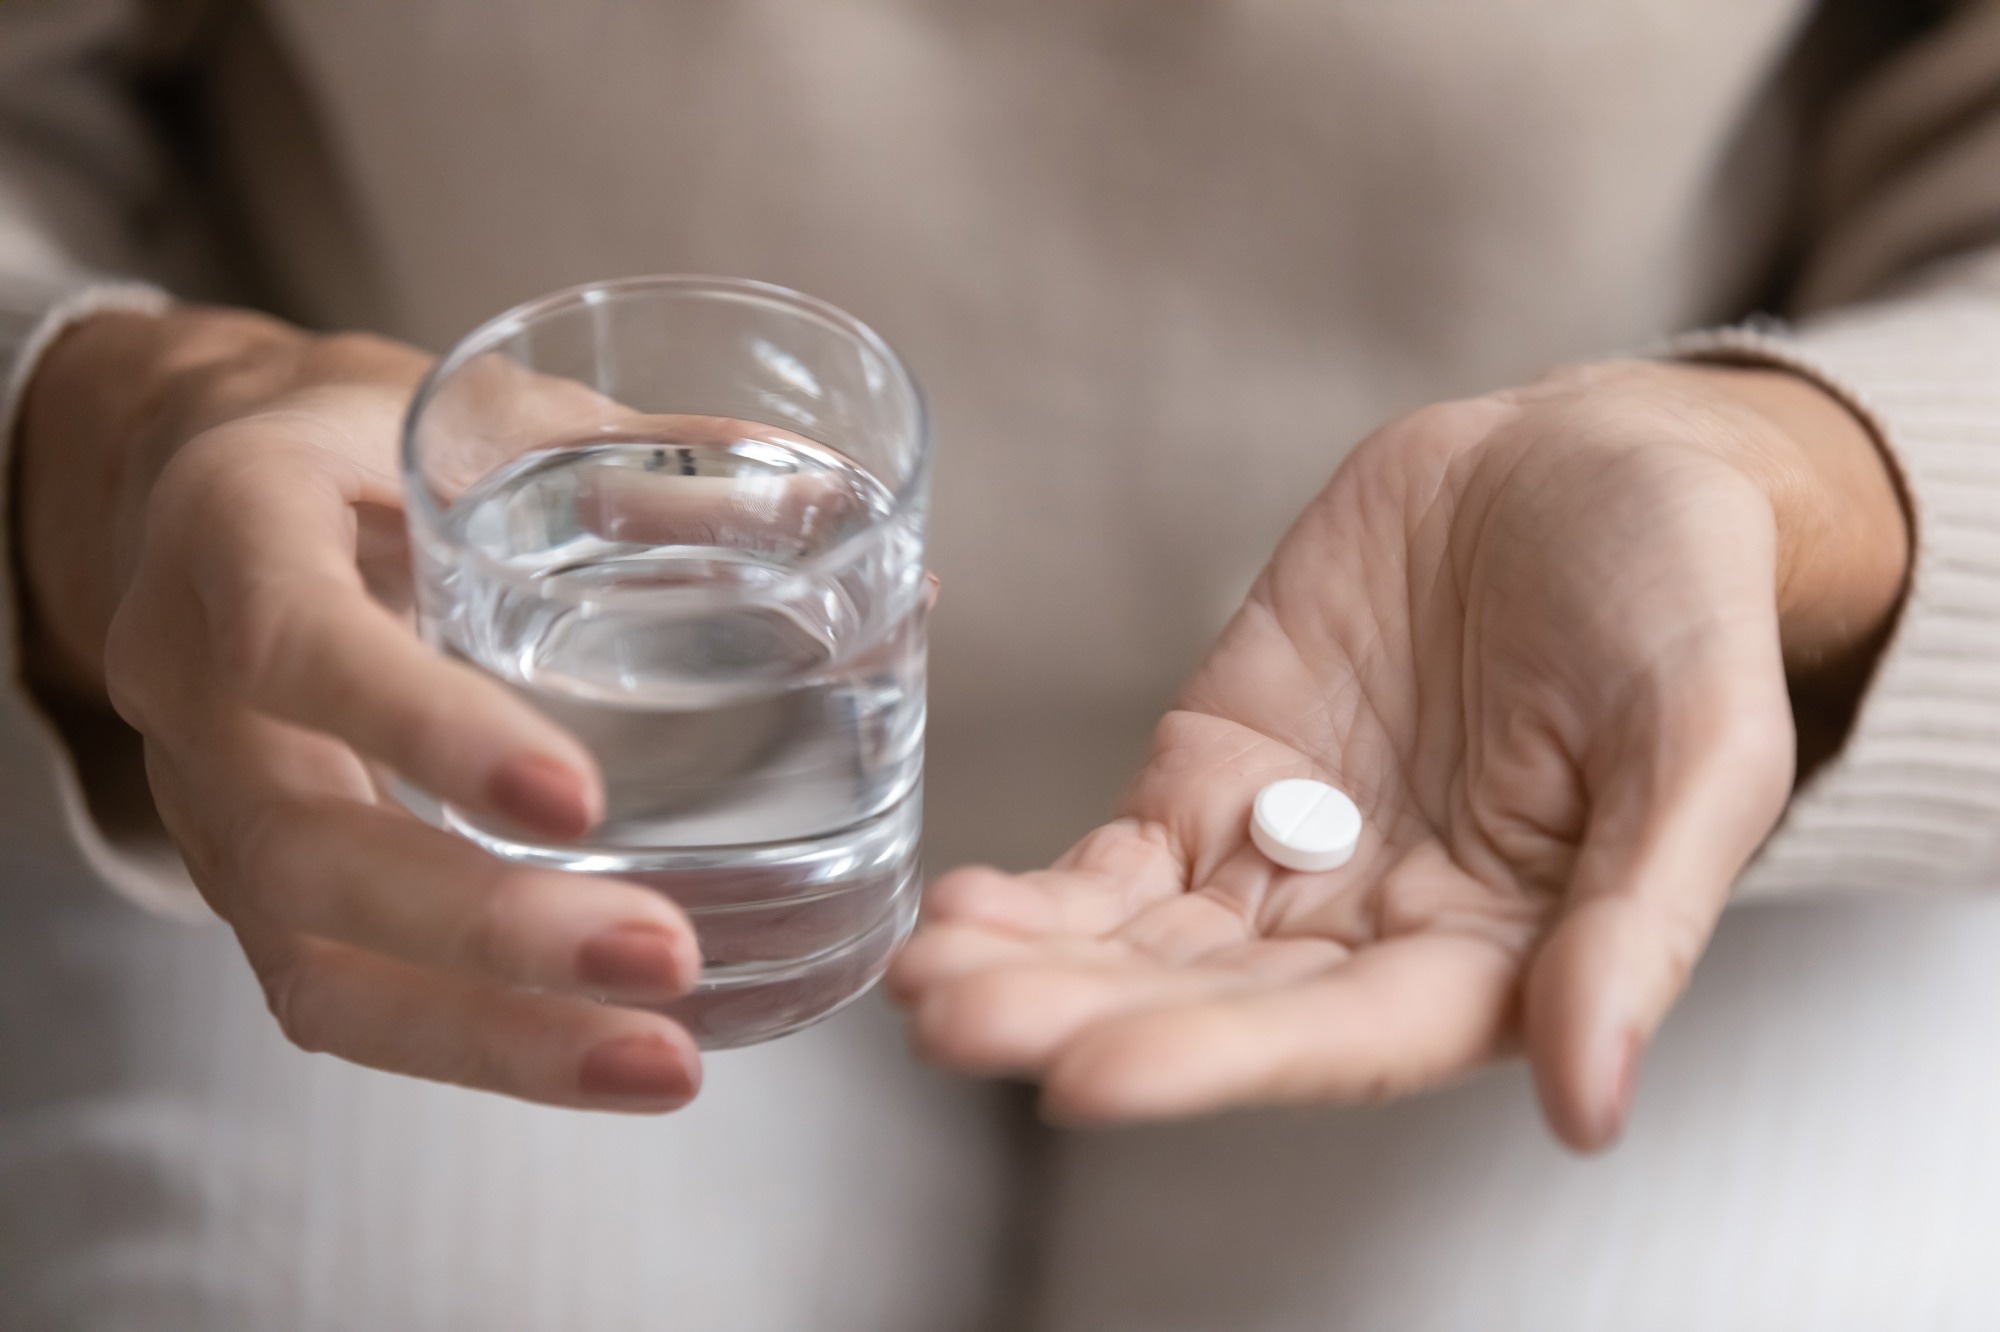 Study: Potential impact on using aspirin as the primary prevention of adverse pregnancy outcomes in twins conceived using ART. Image Credit: fizkes/Shutterstock.com